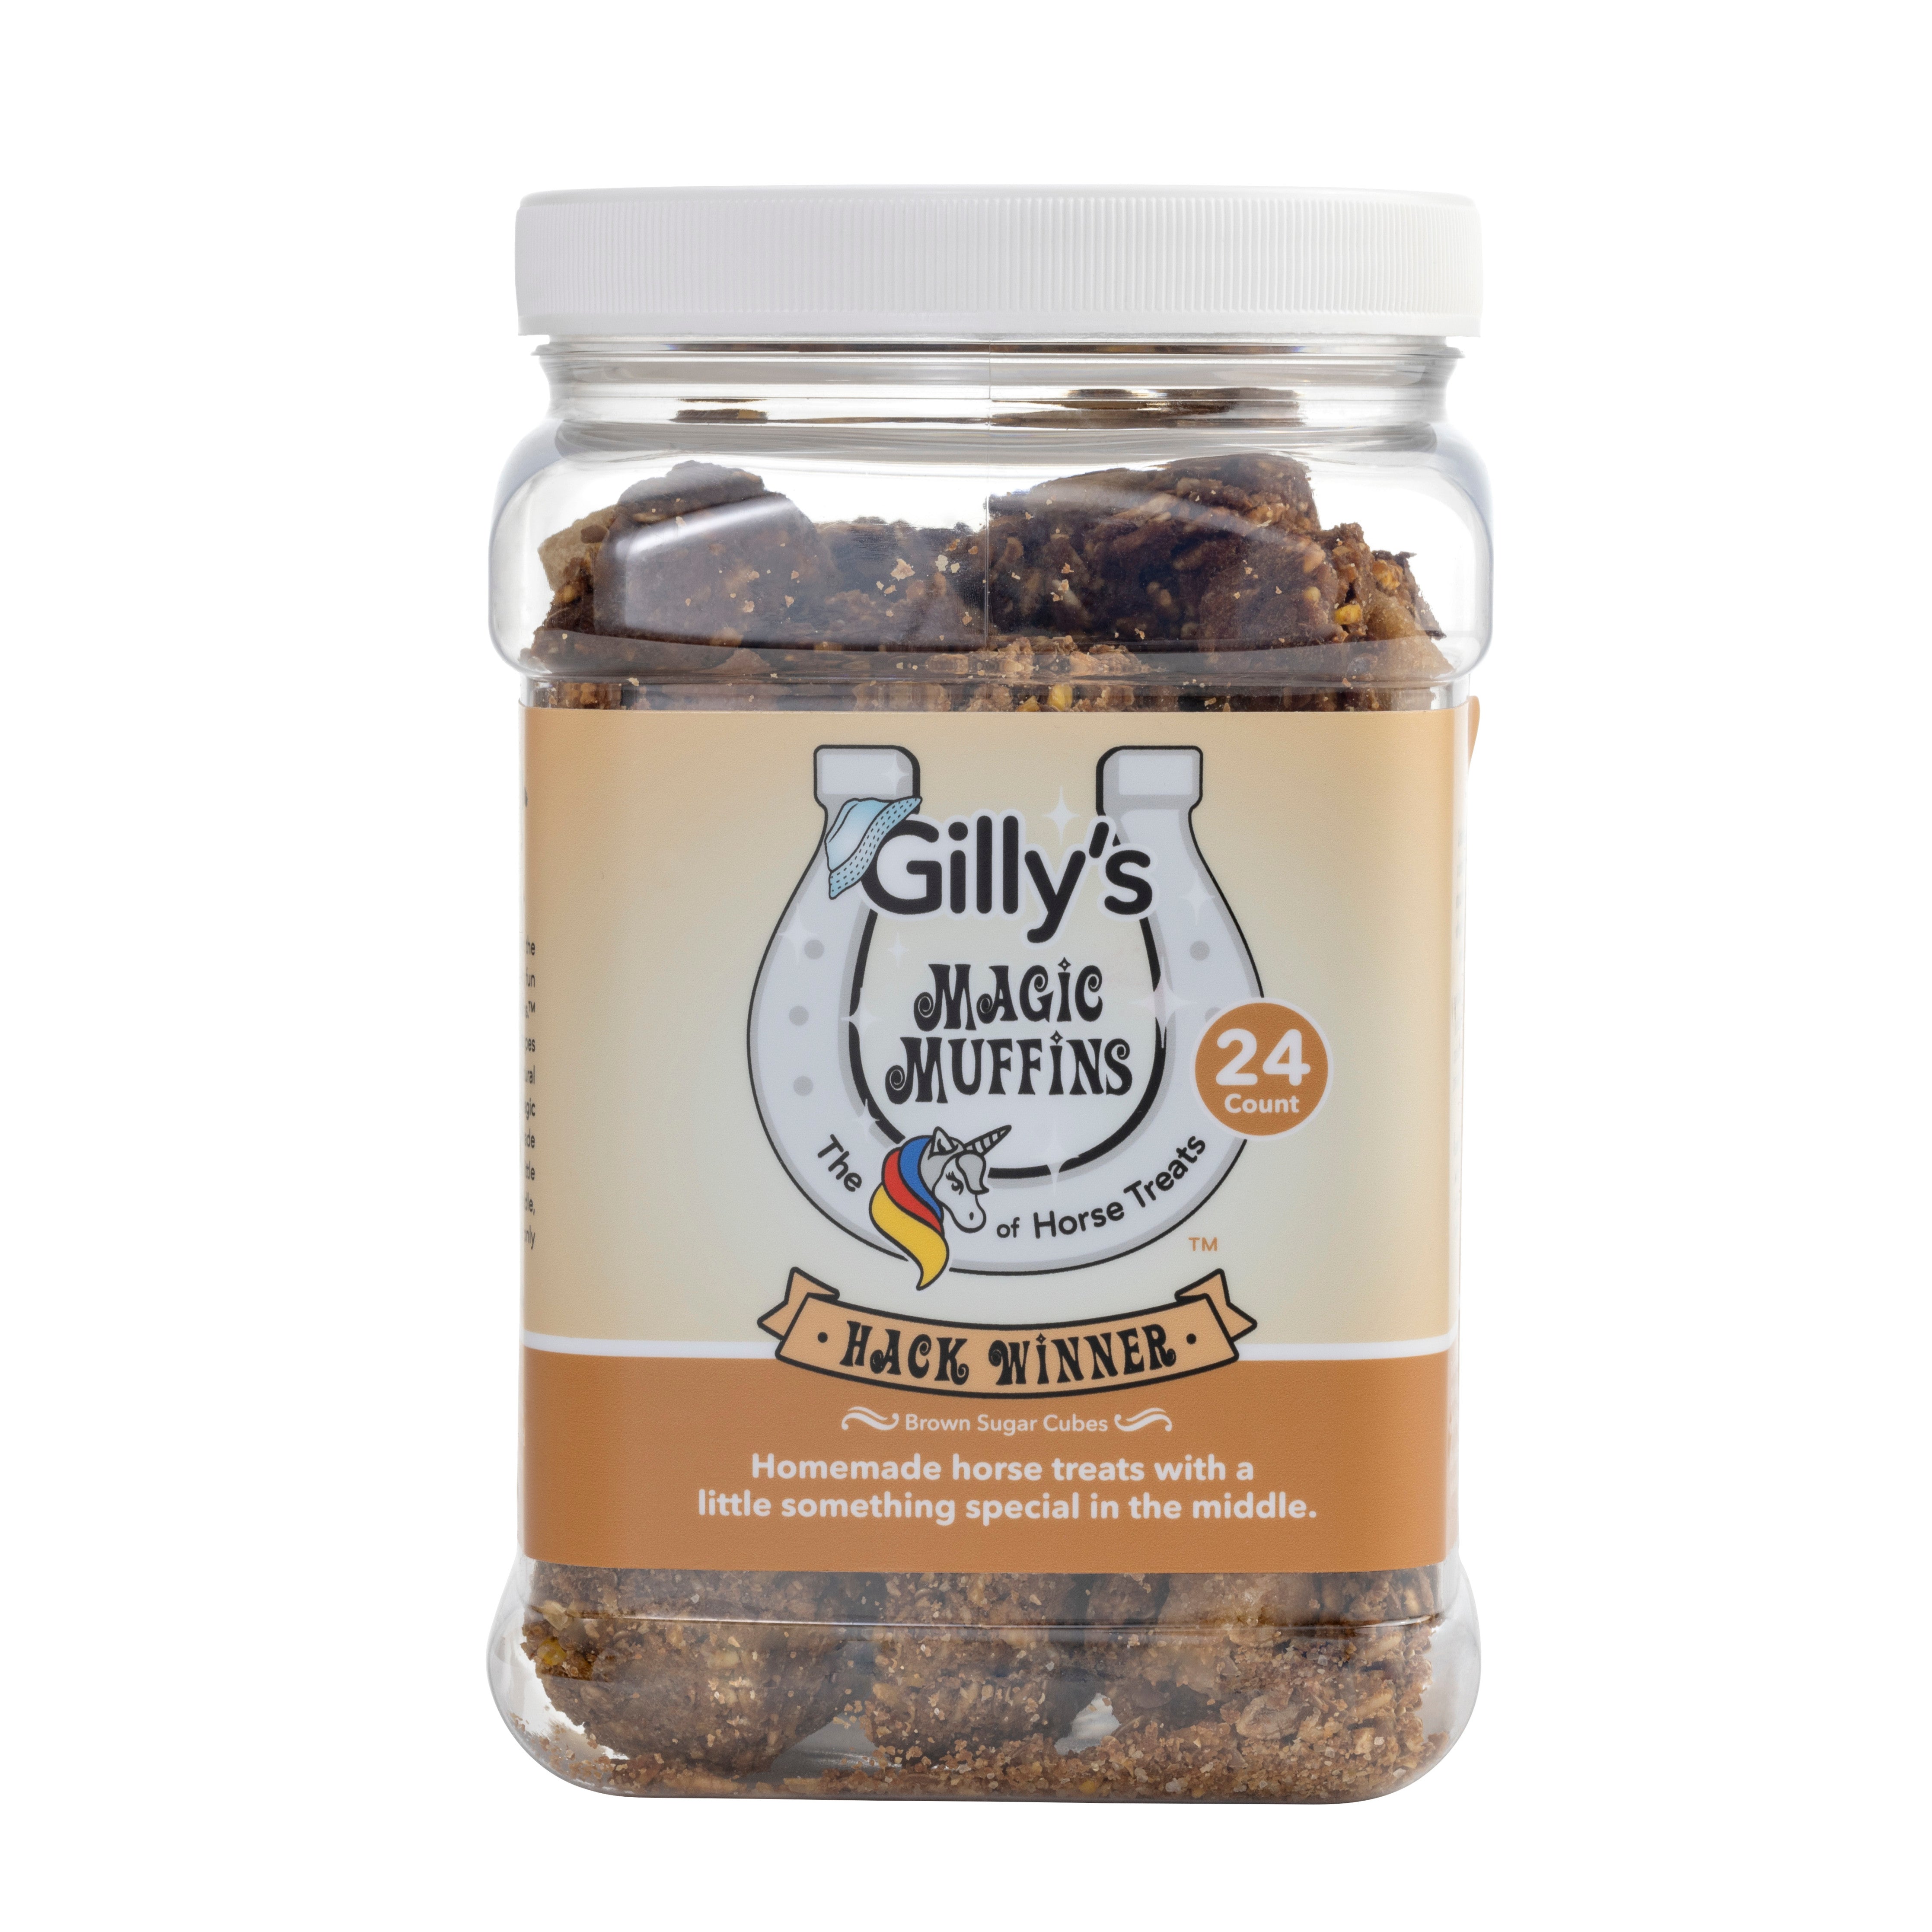 Gilly's Magic Muffins 24-ct jar